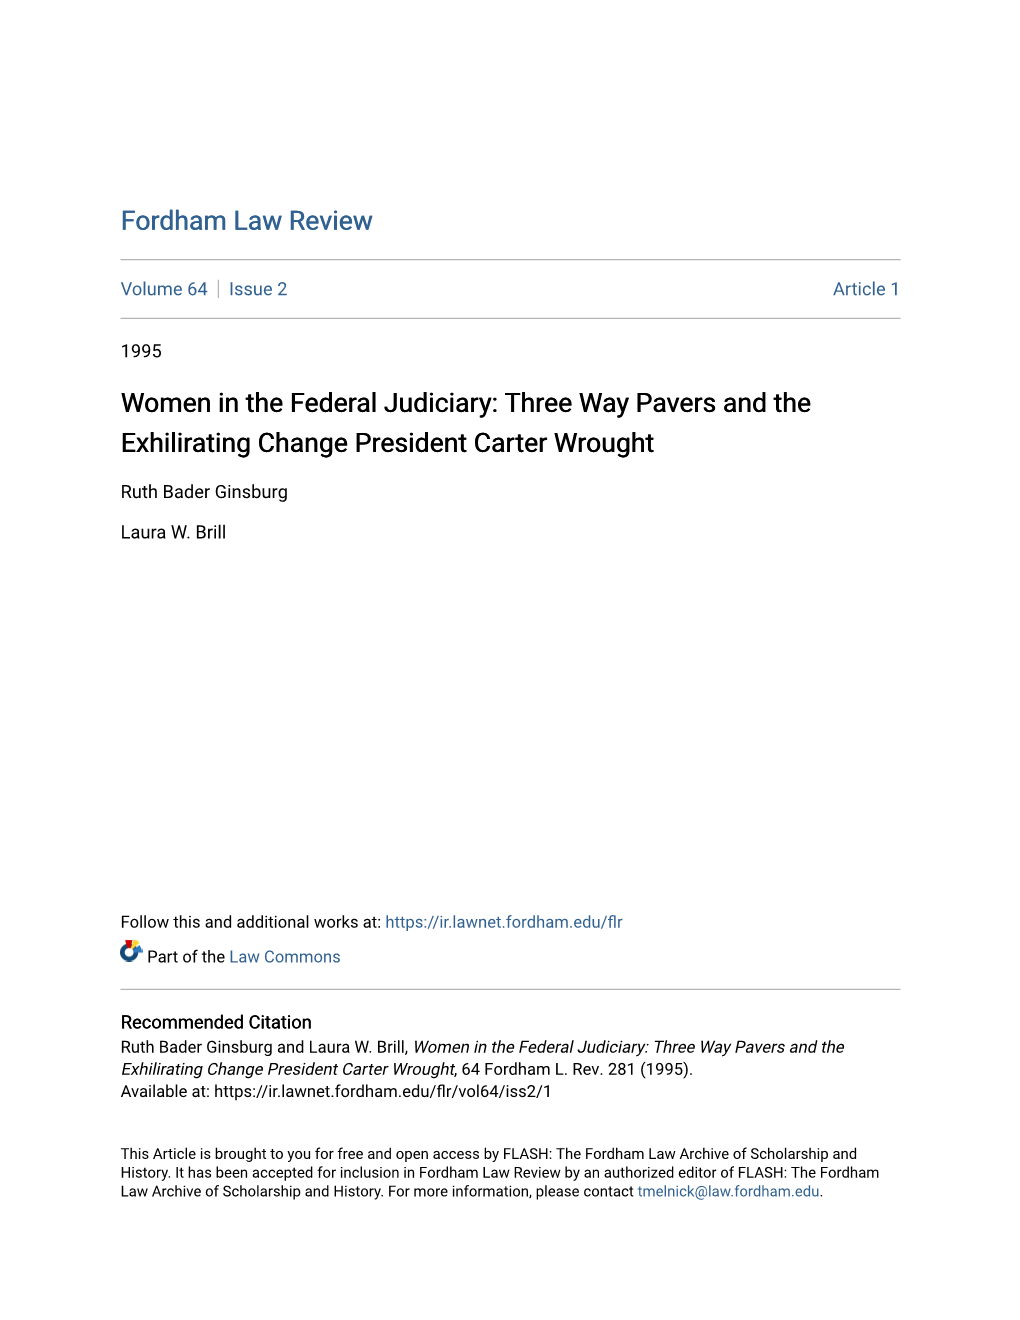 Women in the Federal Judiciary: Three Way Pavers and the Exhilirating Change President Carter Wrought